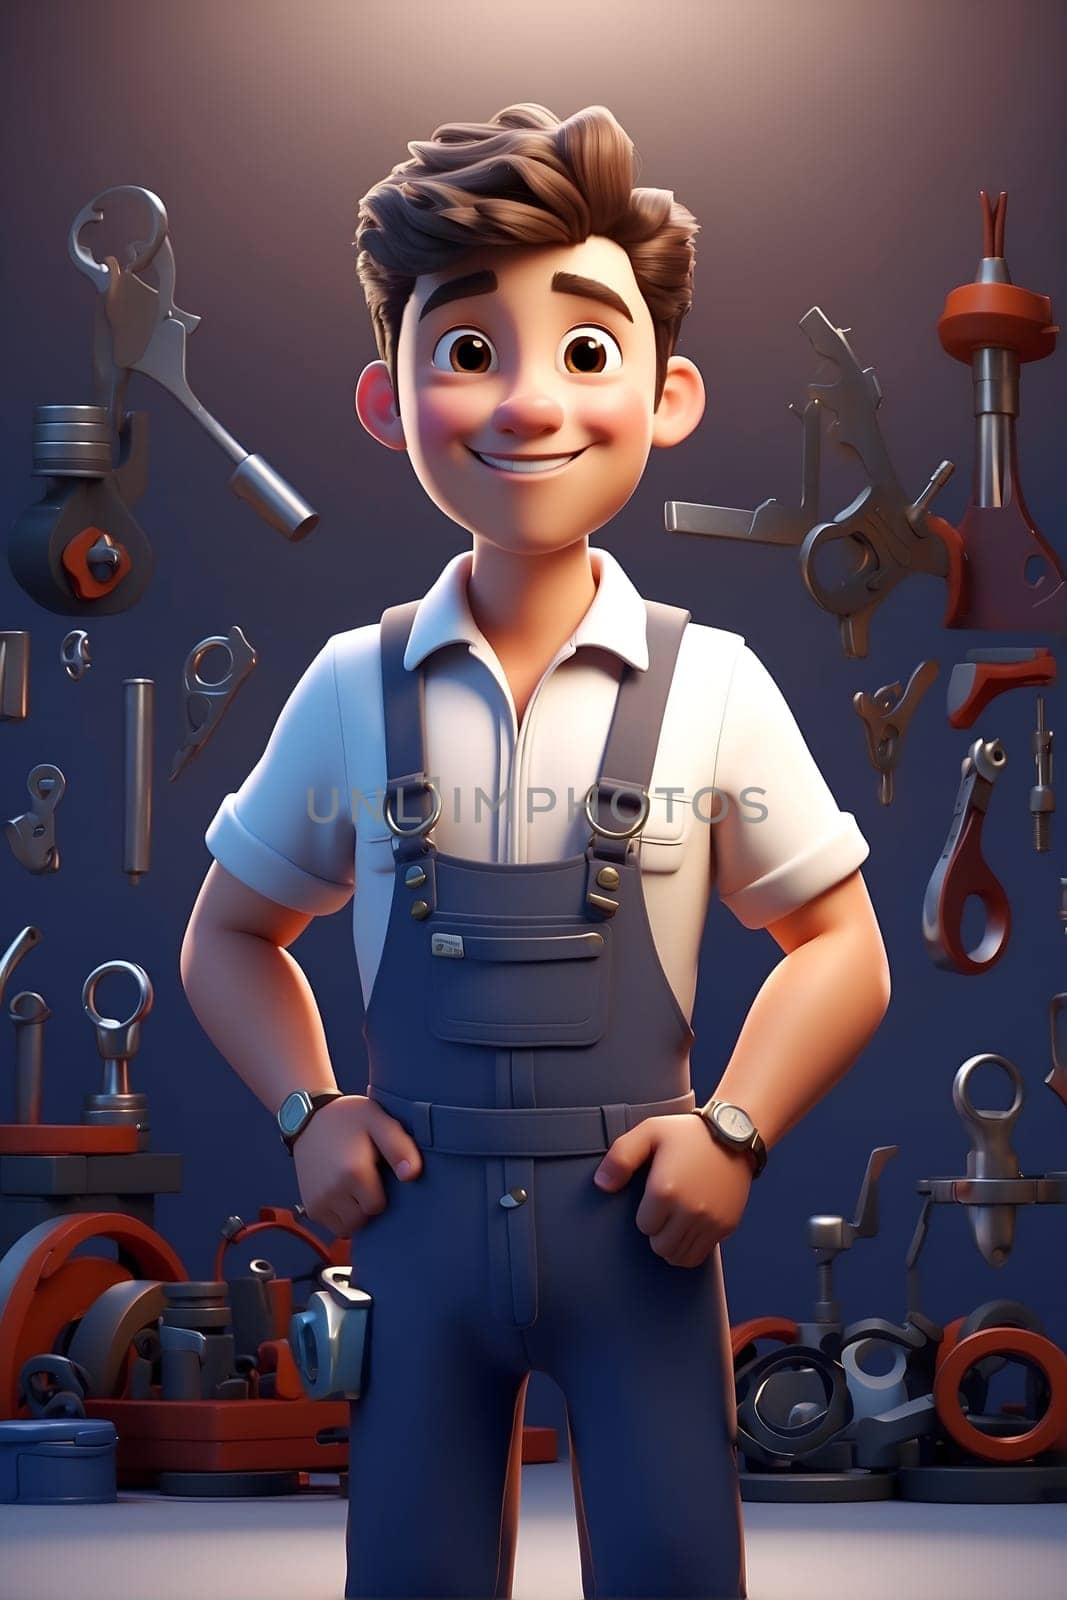 A man stands in front of a diverse collection of tools, ready for work.